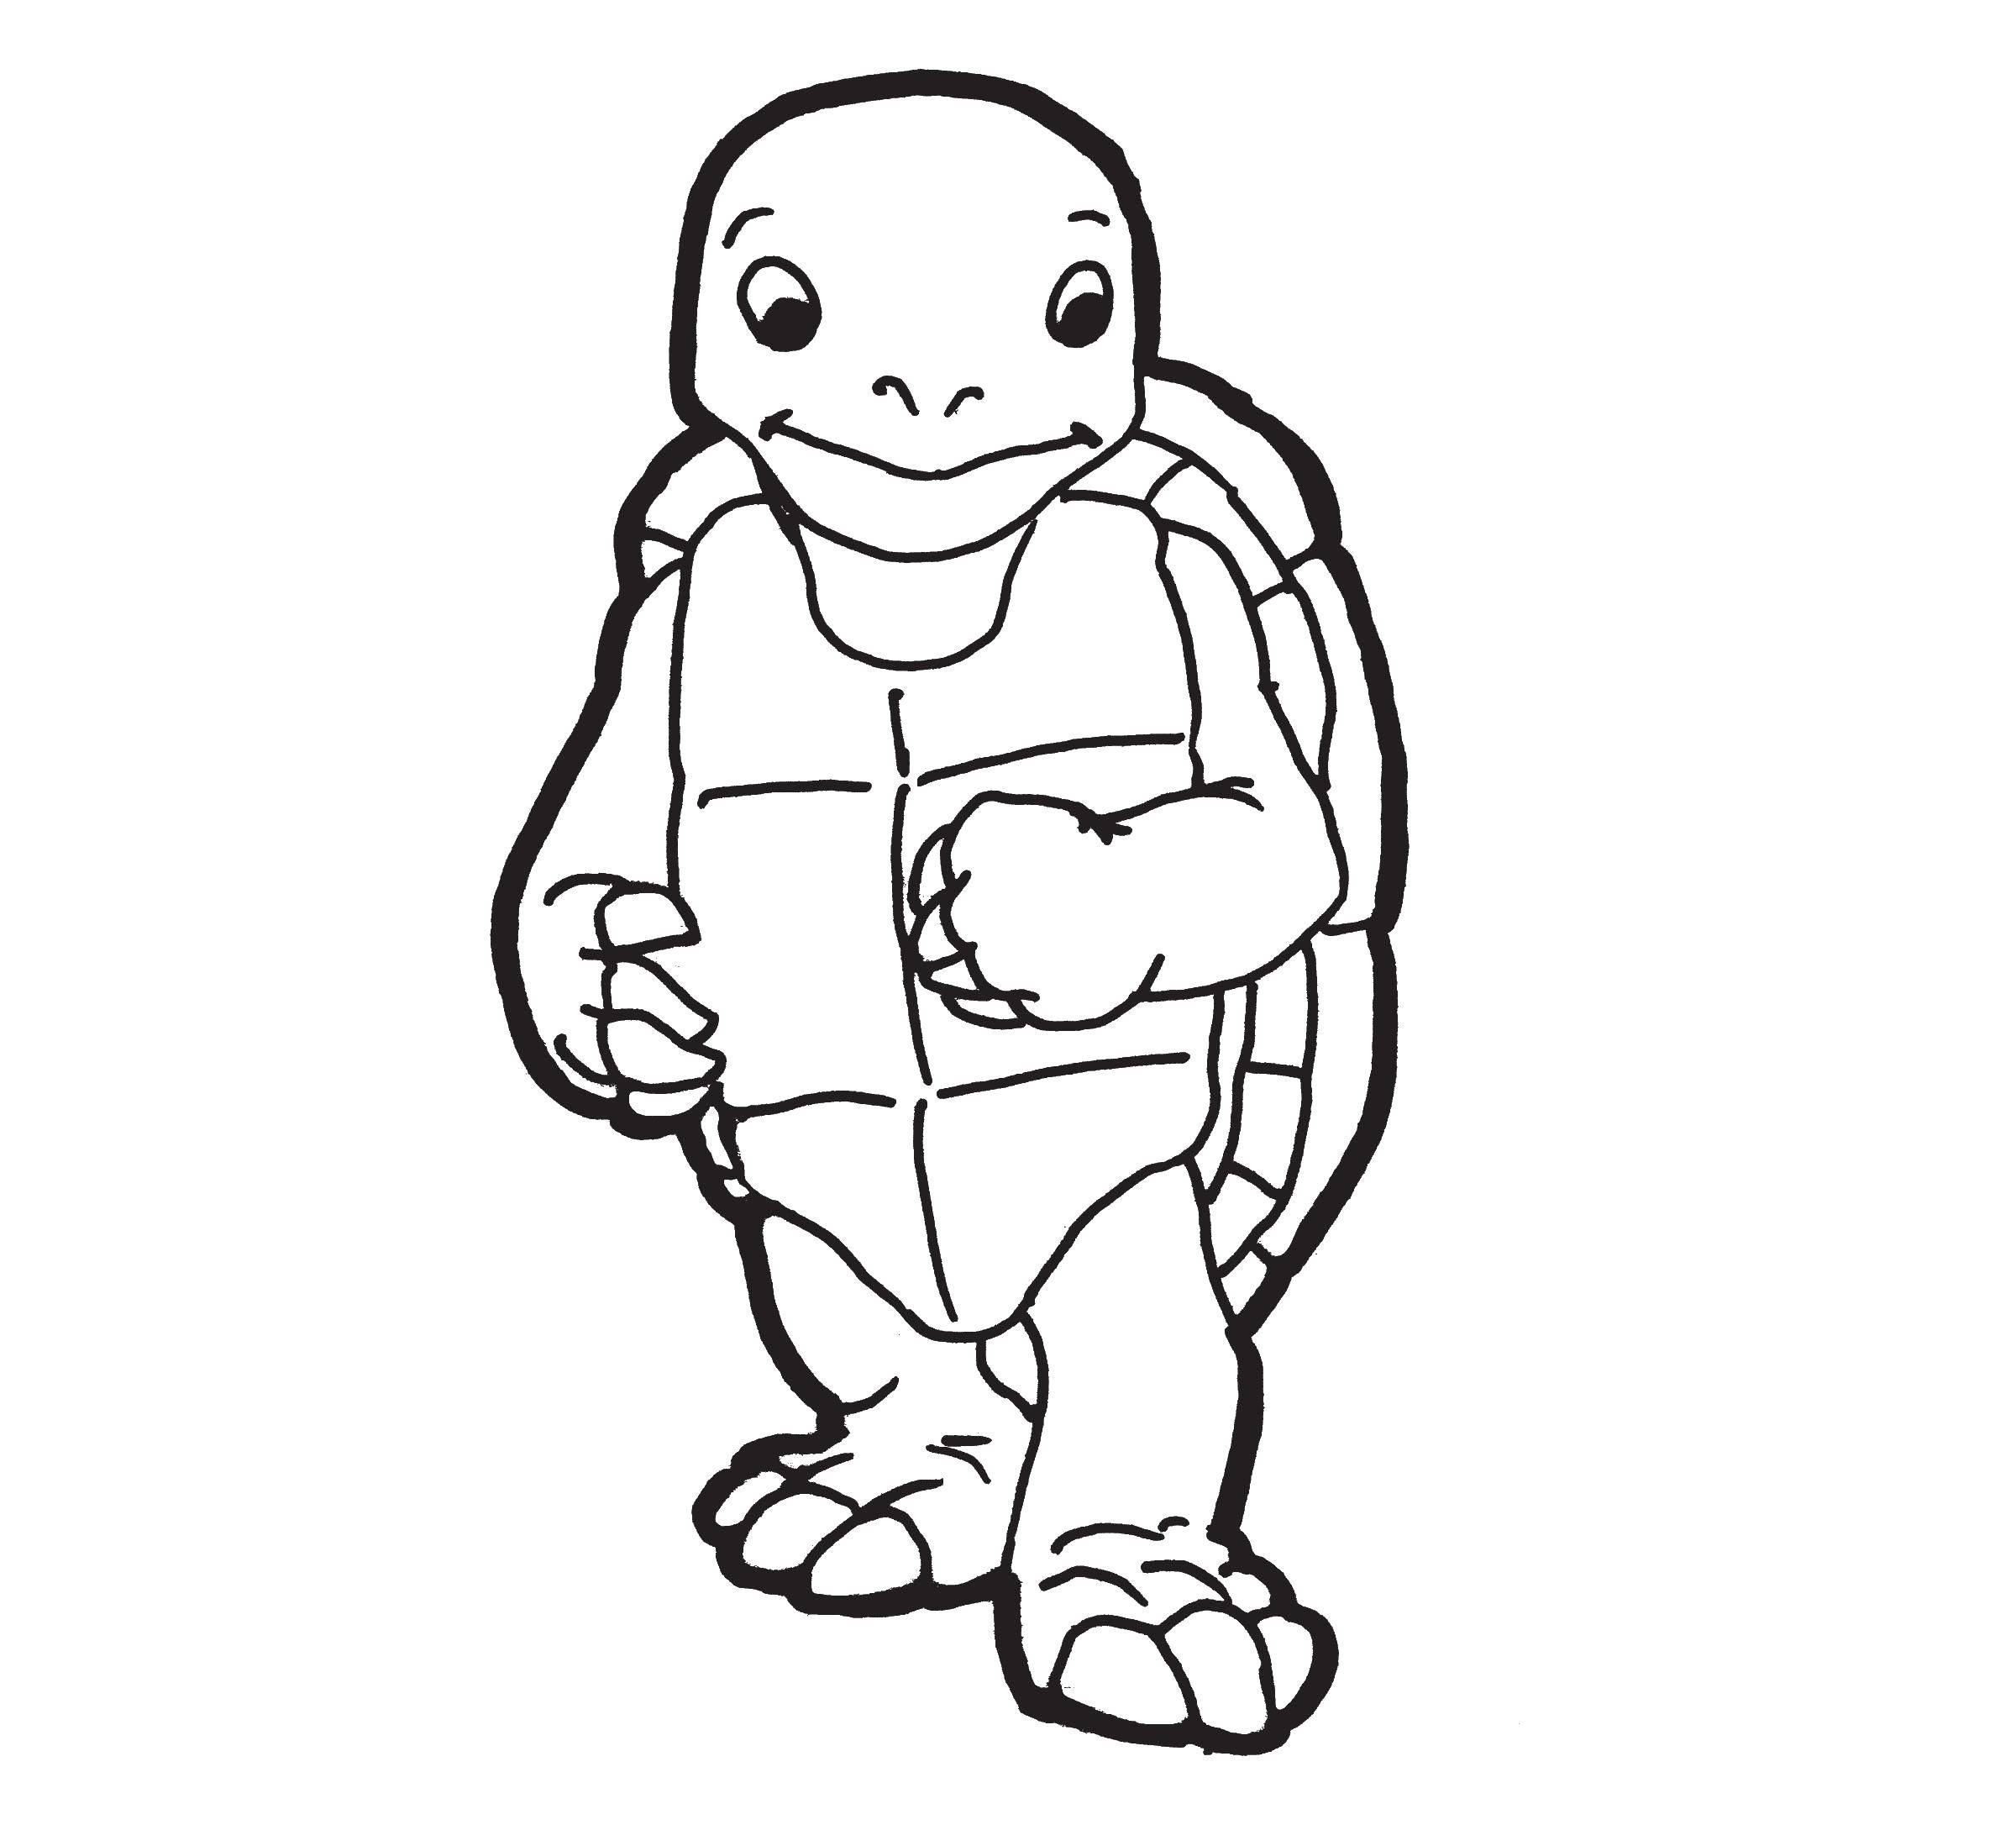 Coloring Standing turtle. Category Turtle. Tags:  Reptile, turtle.